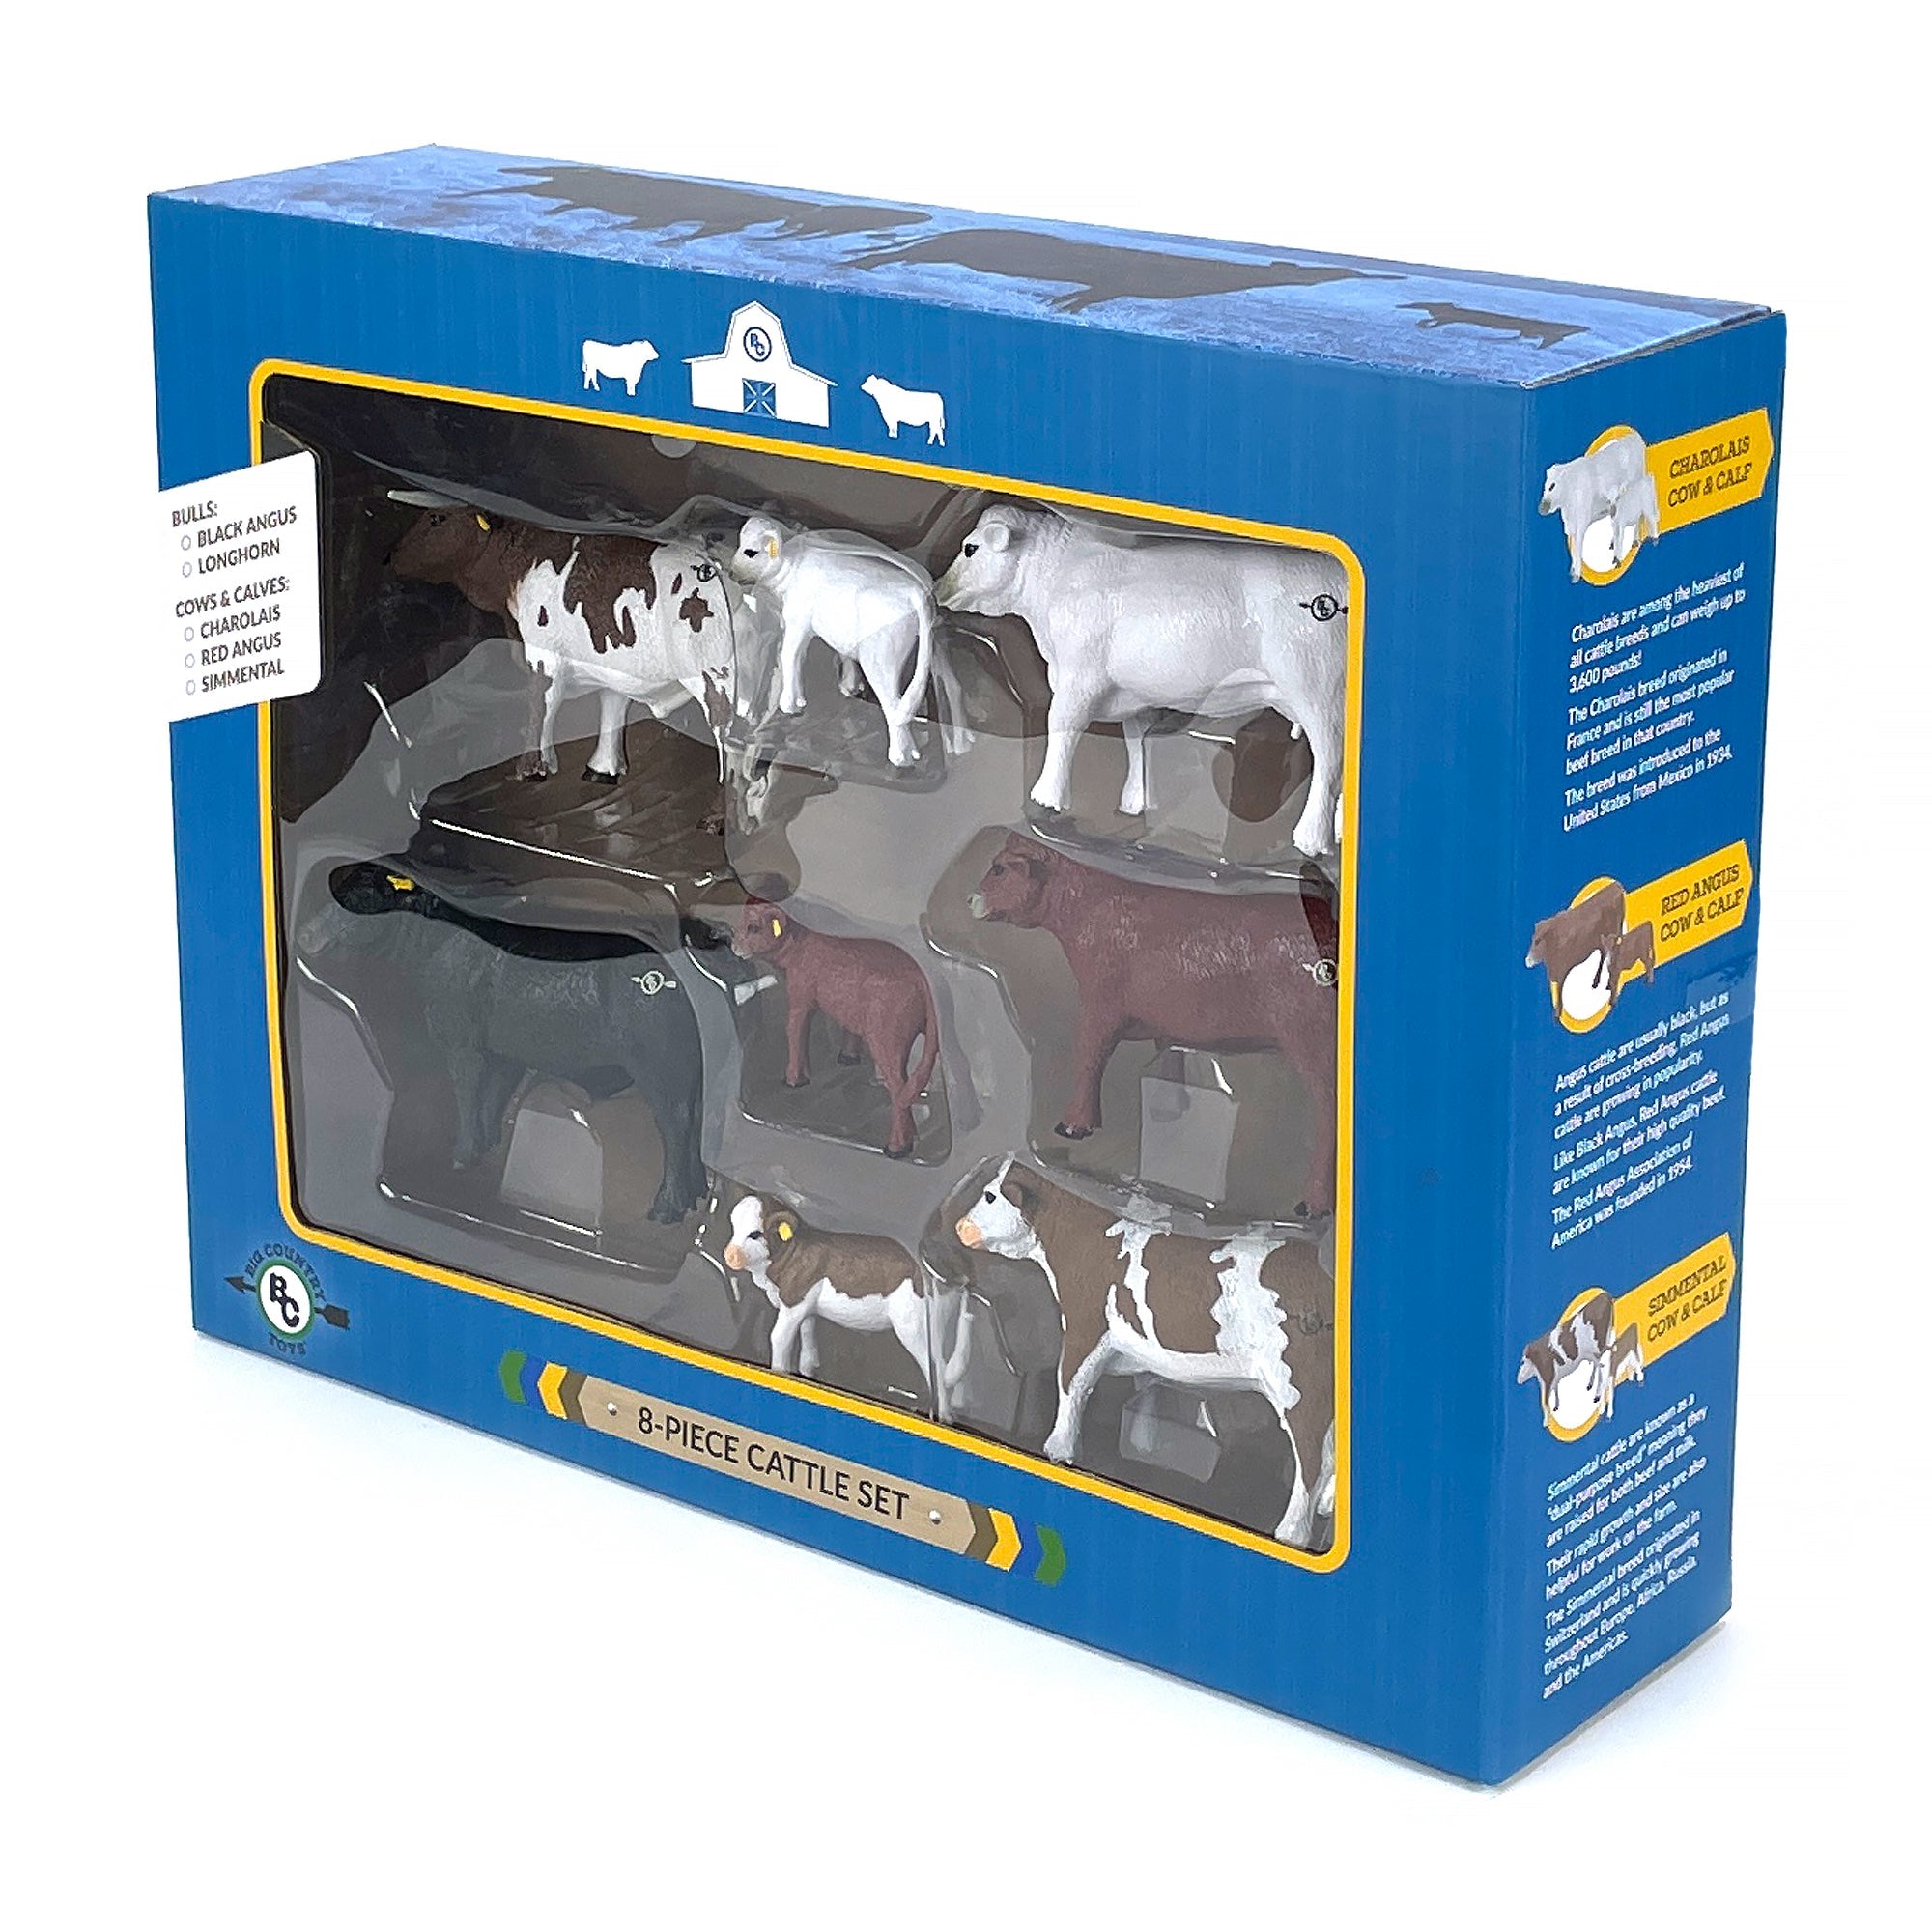 Marketer of farm and ranch toys including animals, vehicles and accessories  .